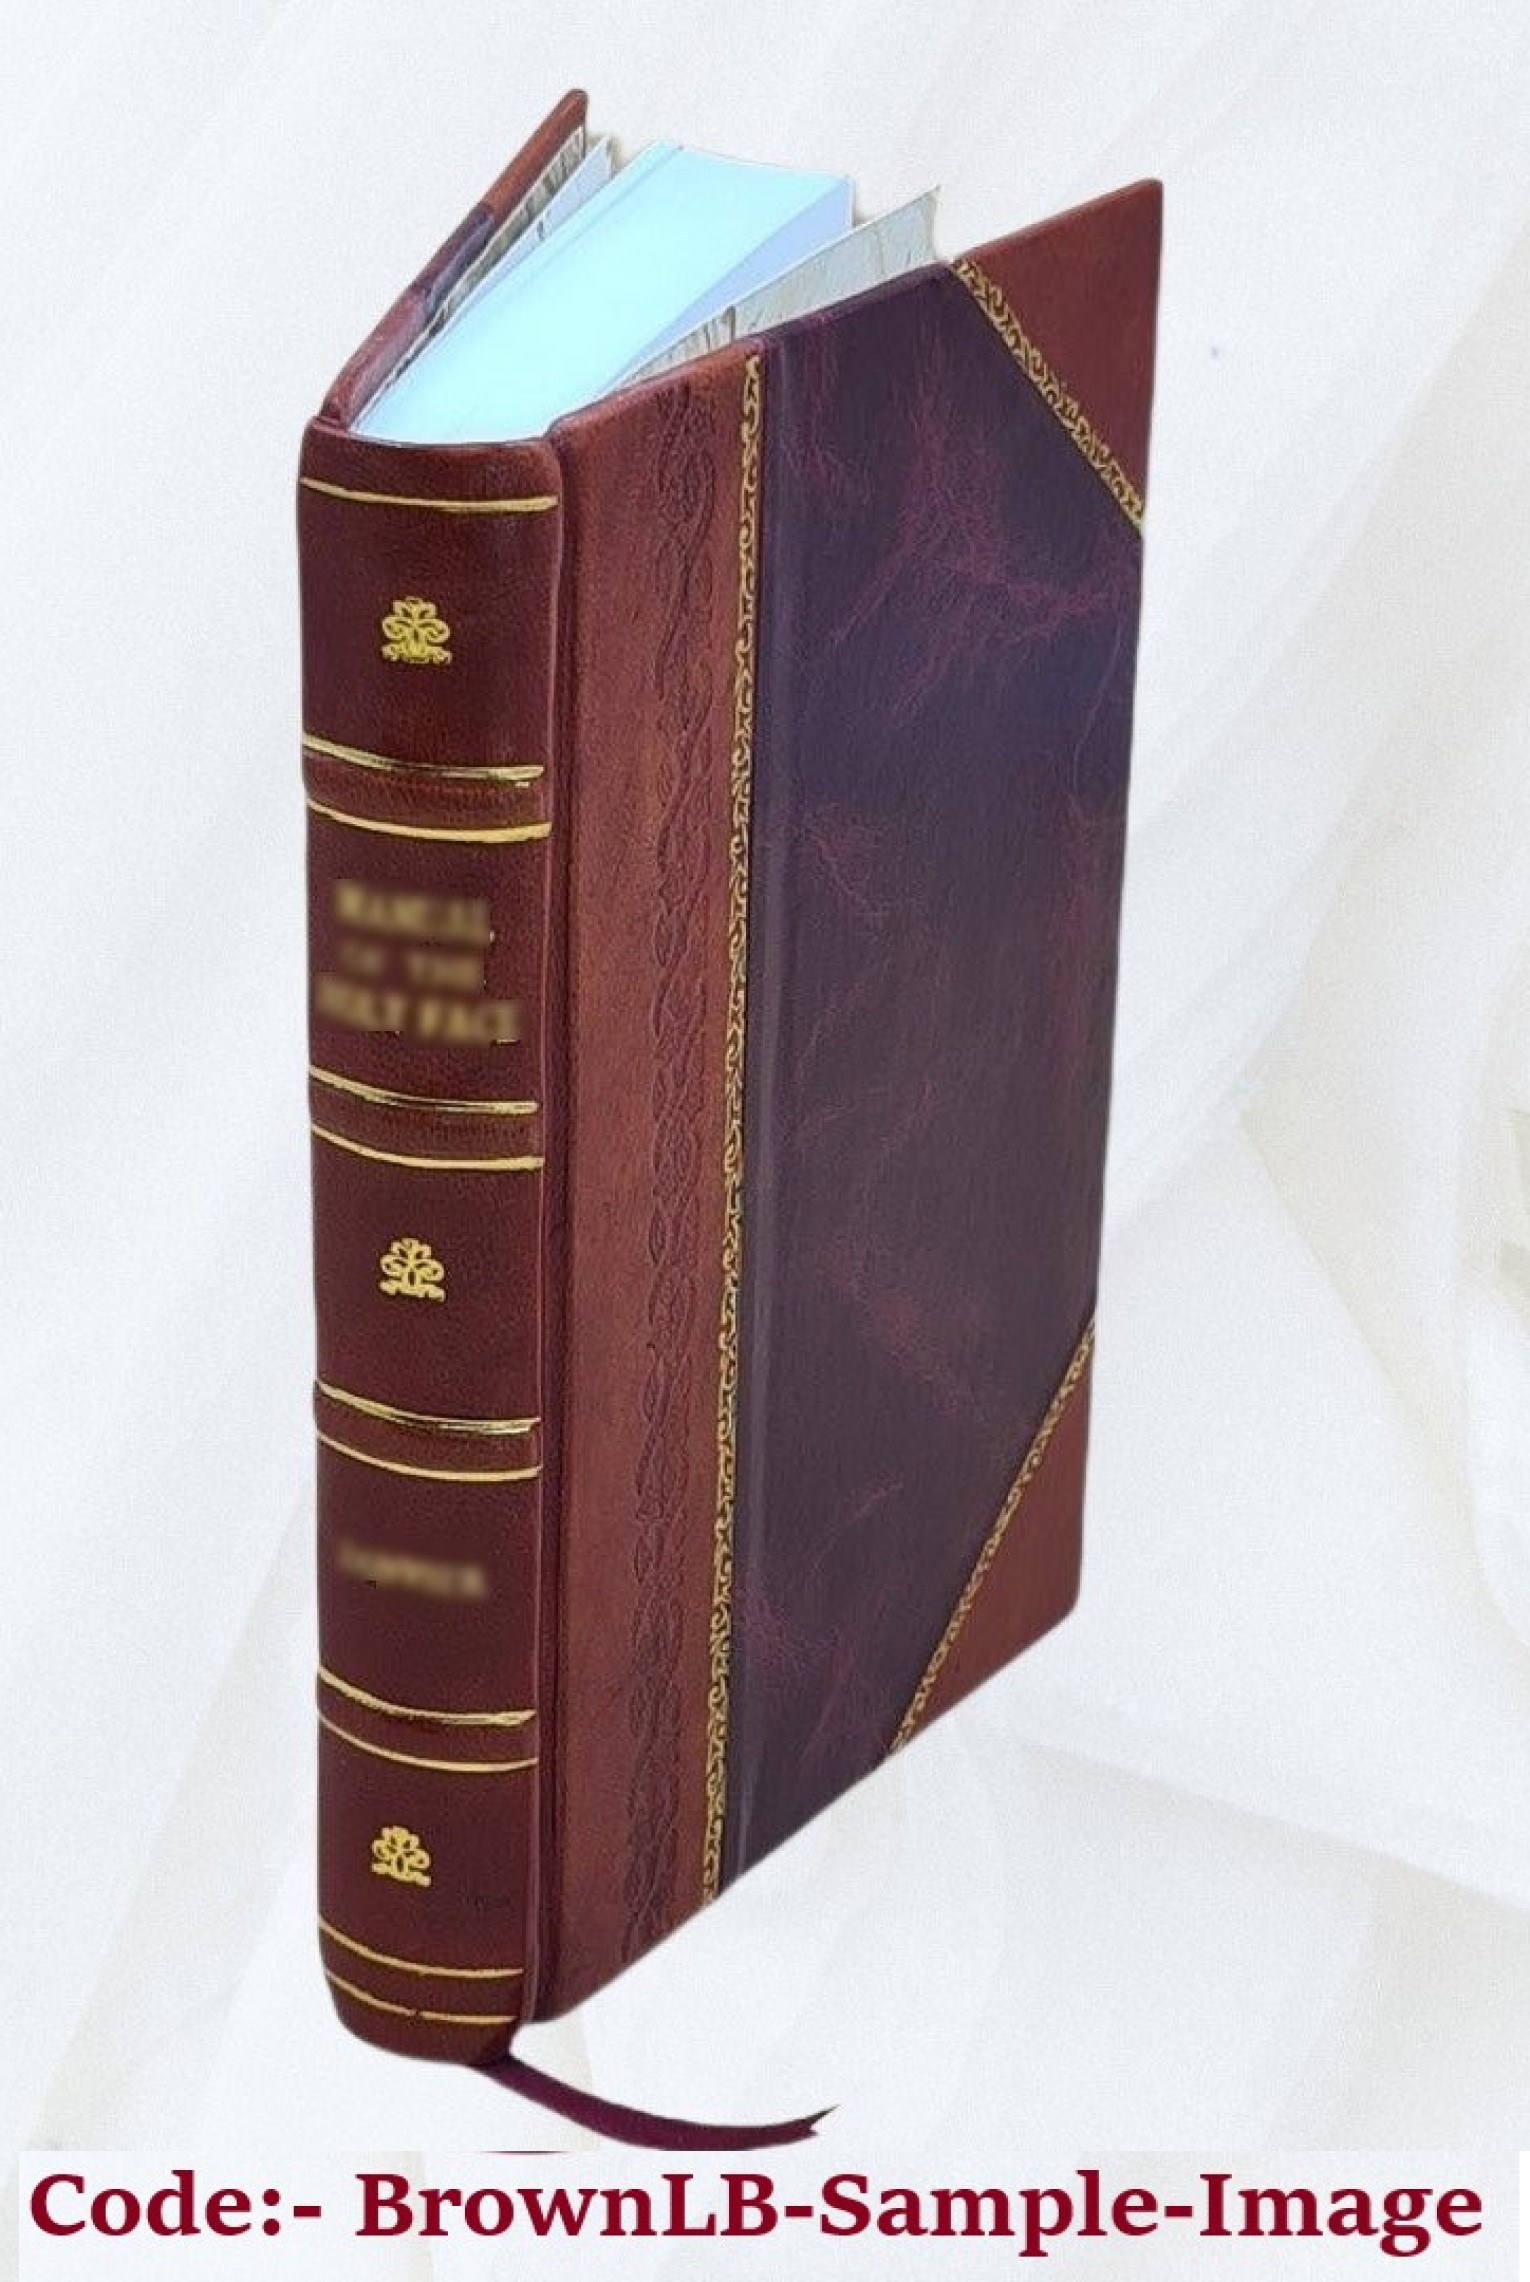 Americanized delsarte culture / by Emily M. Bishop. 1892 [Leather Bound] - image 1 of 5